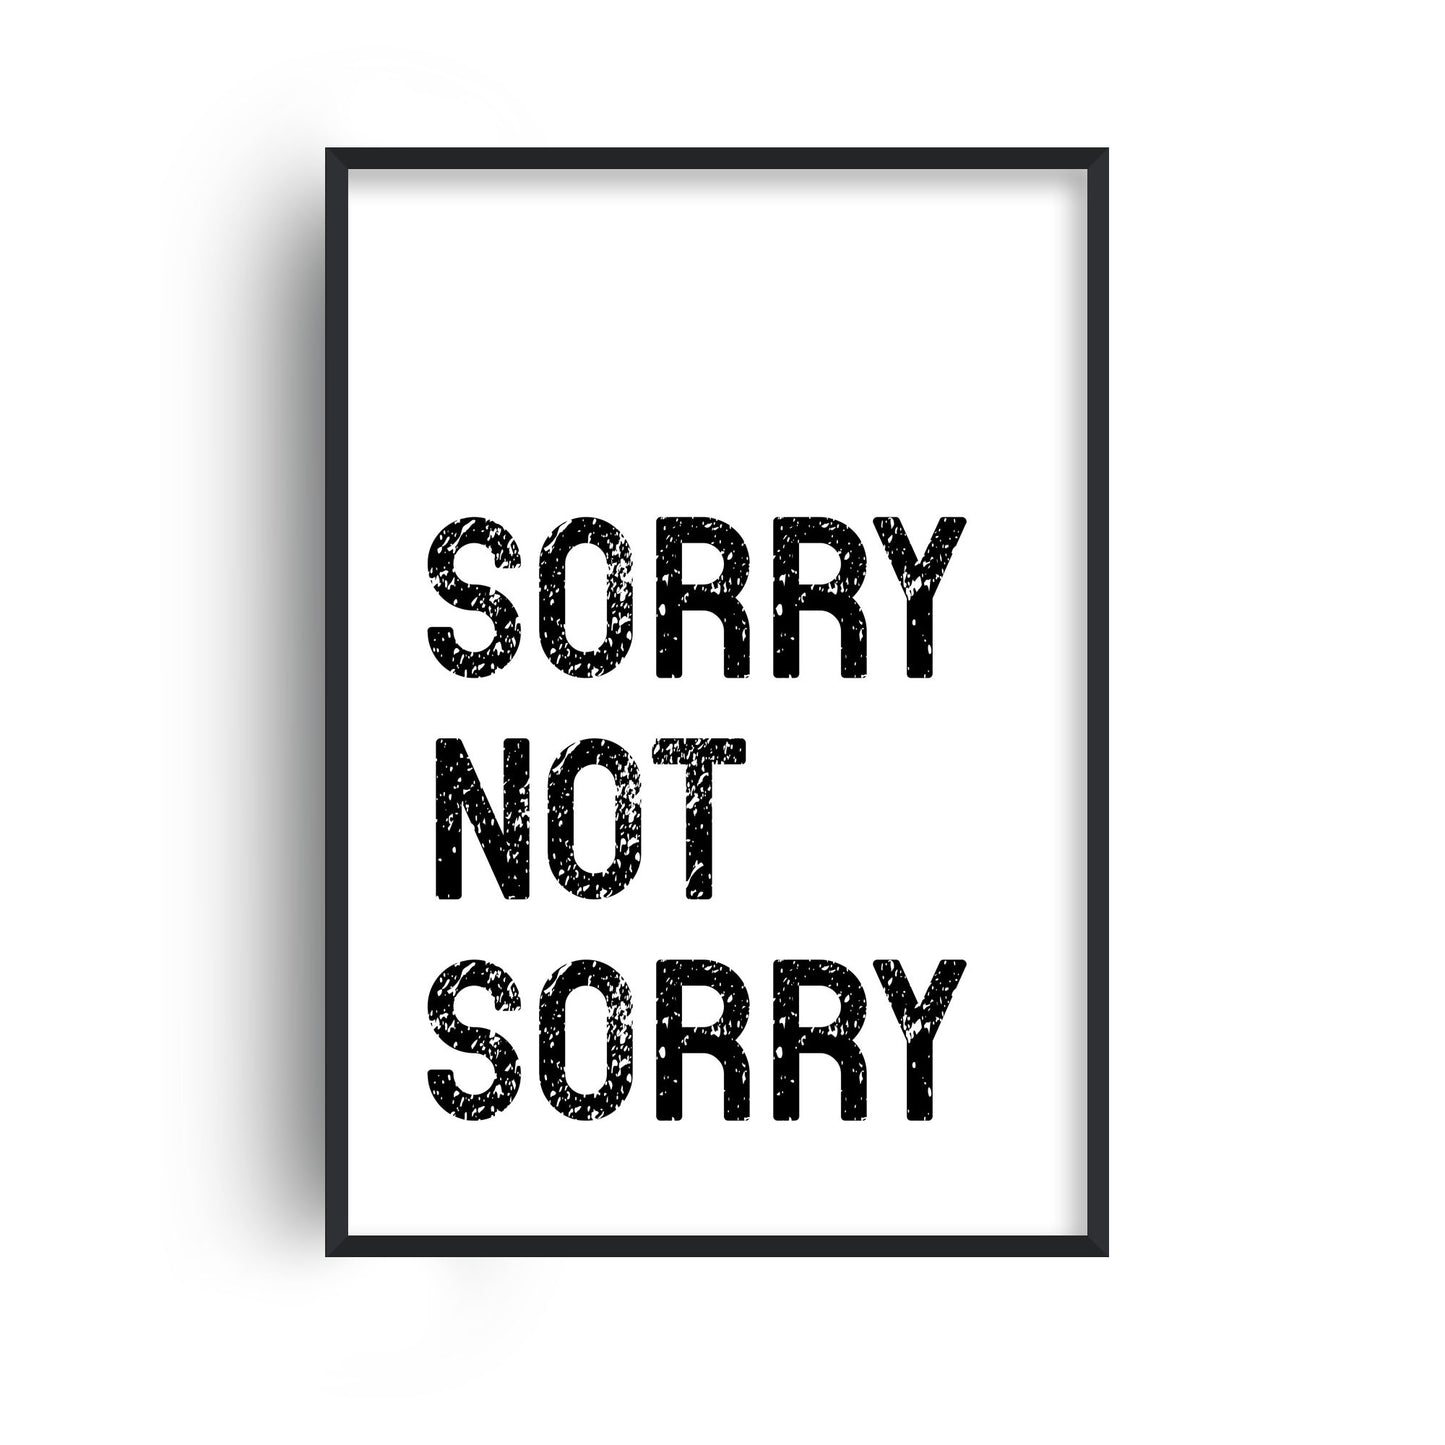 Sorry Not Sorry Print